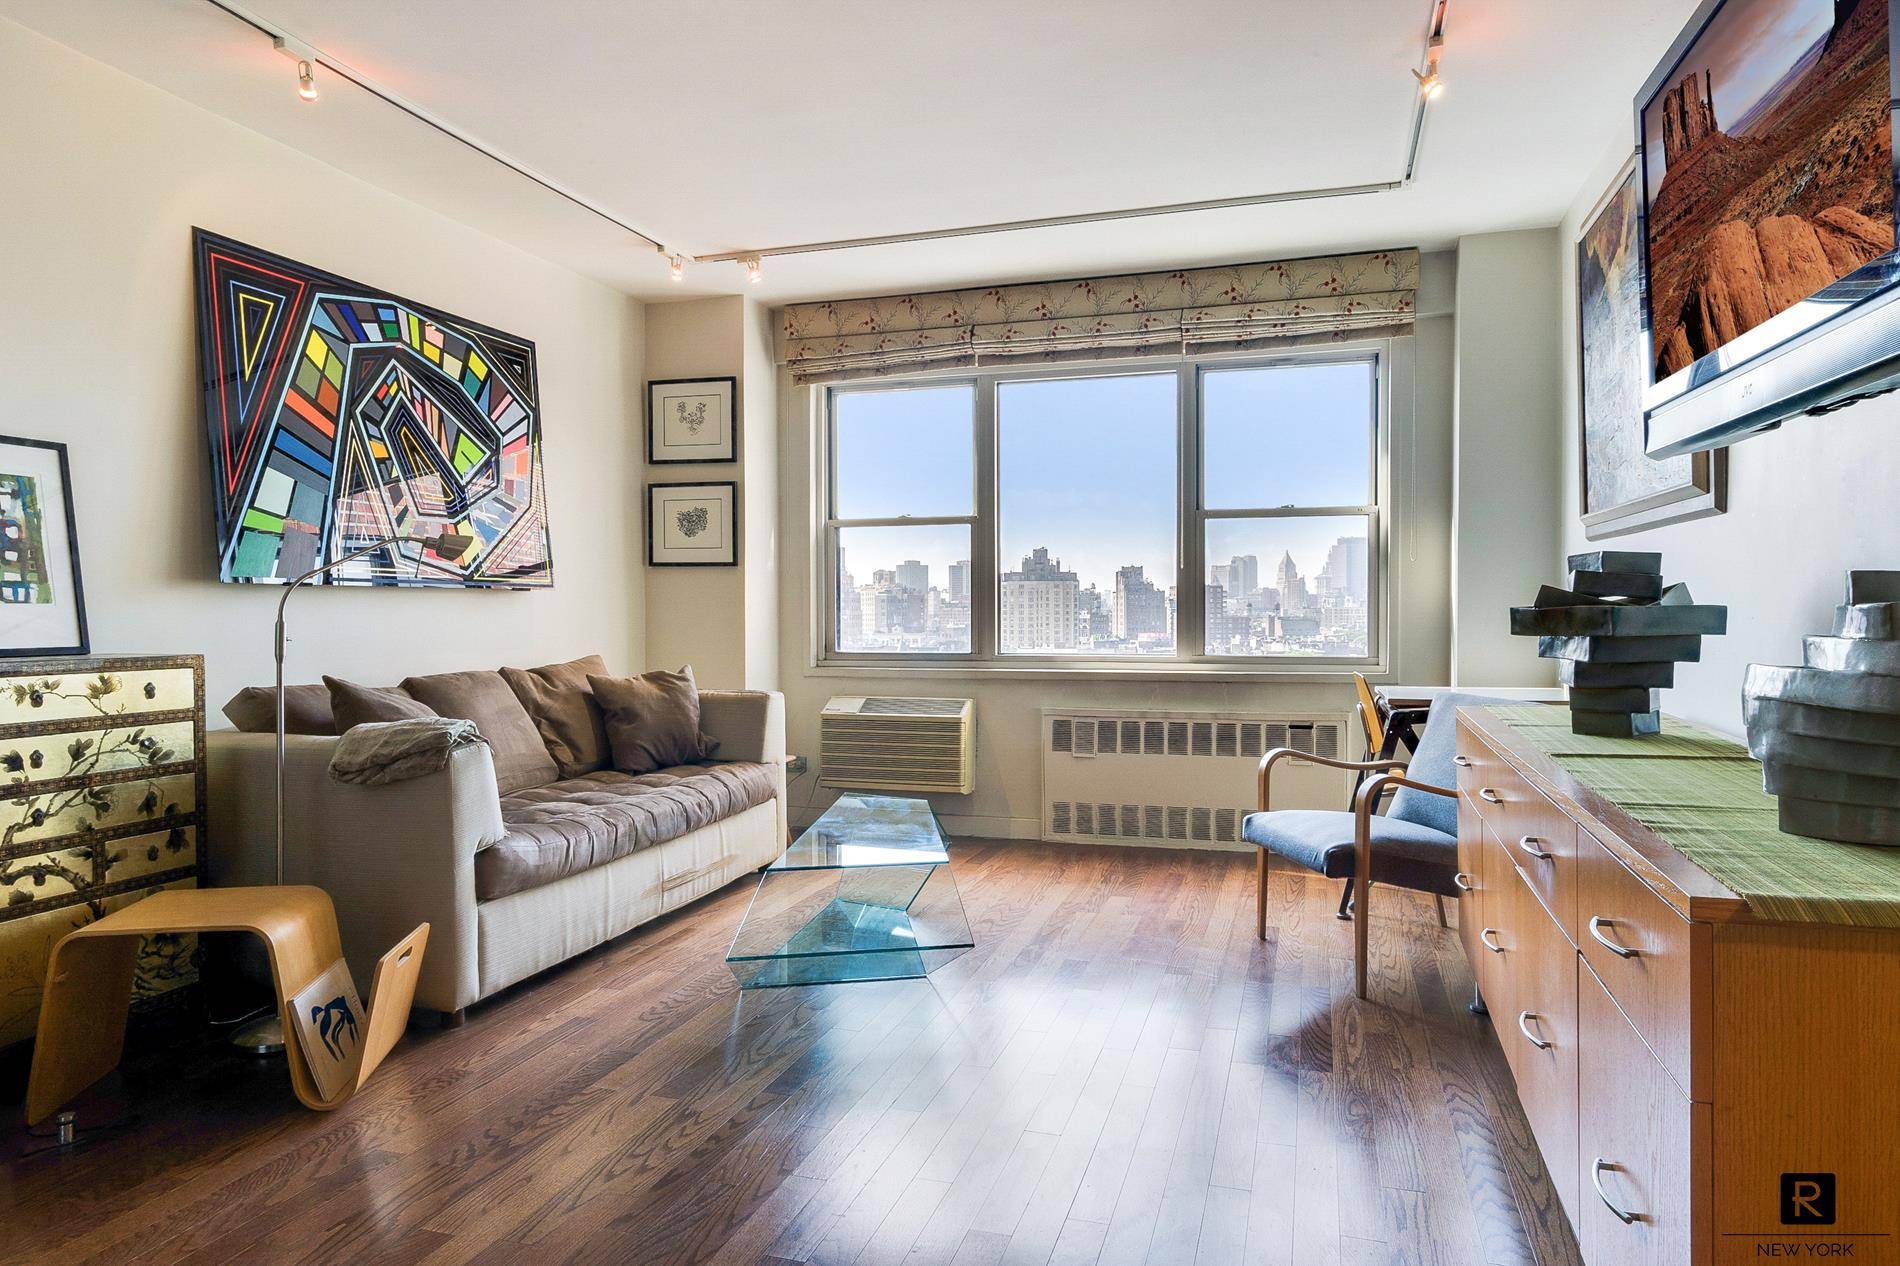 Large and luxurious studio in the highly sought after Van Gogh Coop adjacent to beautiful Jackson Square Park in the West Village.